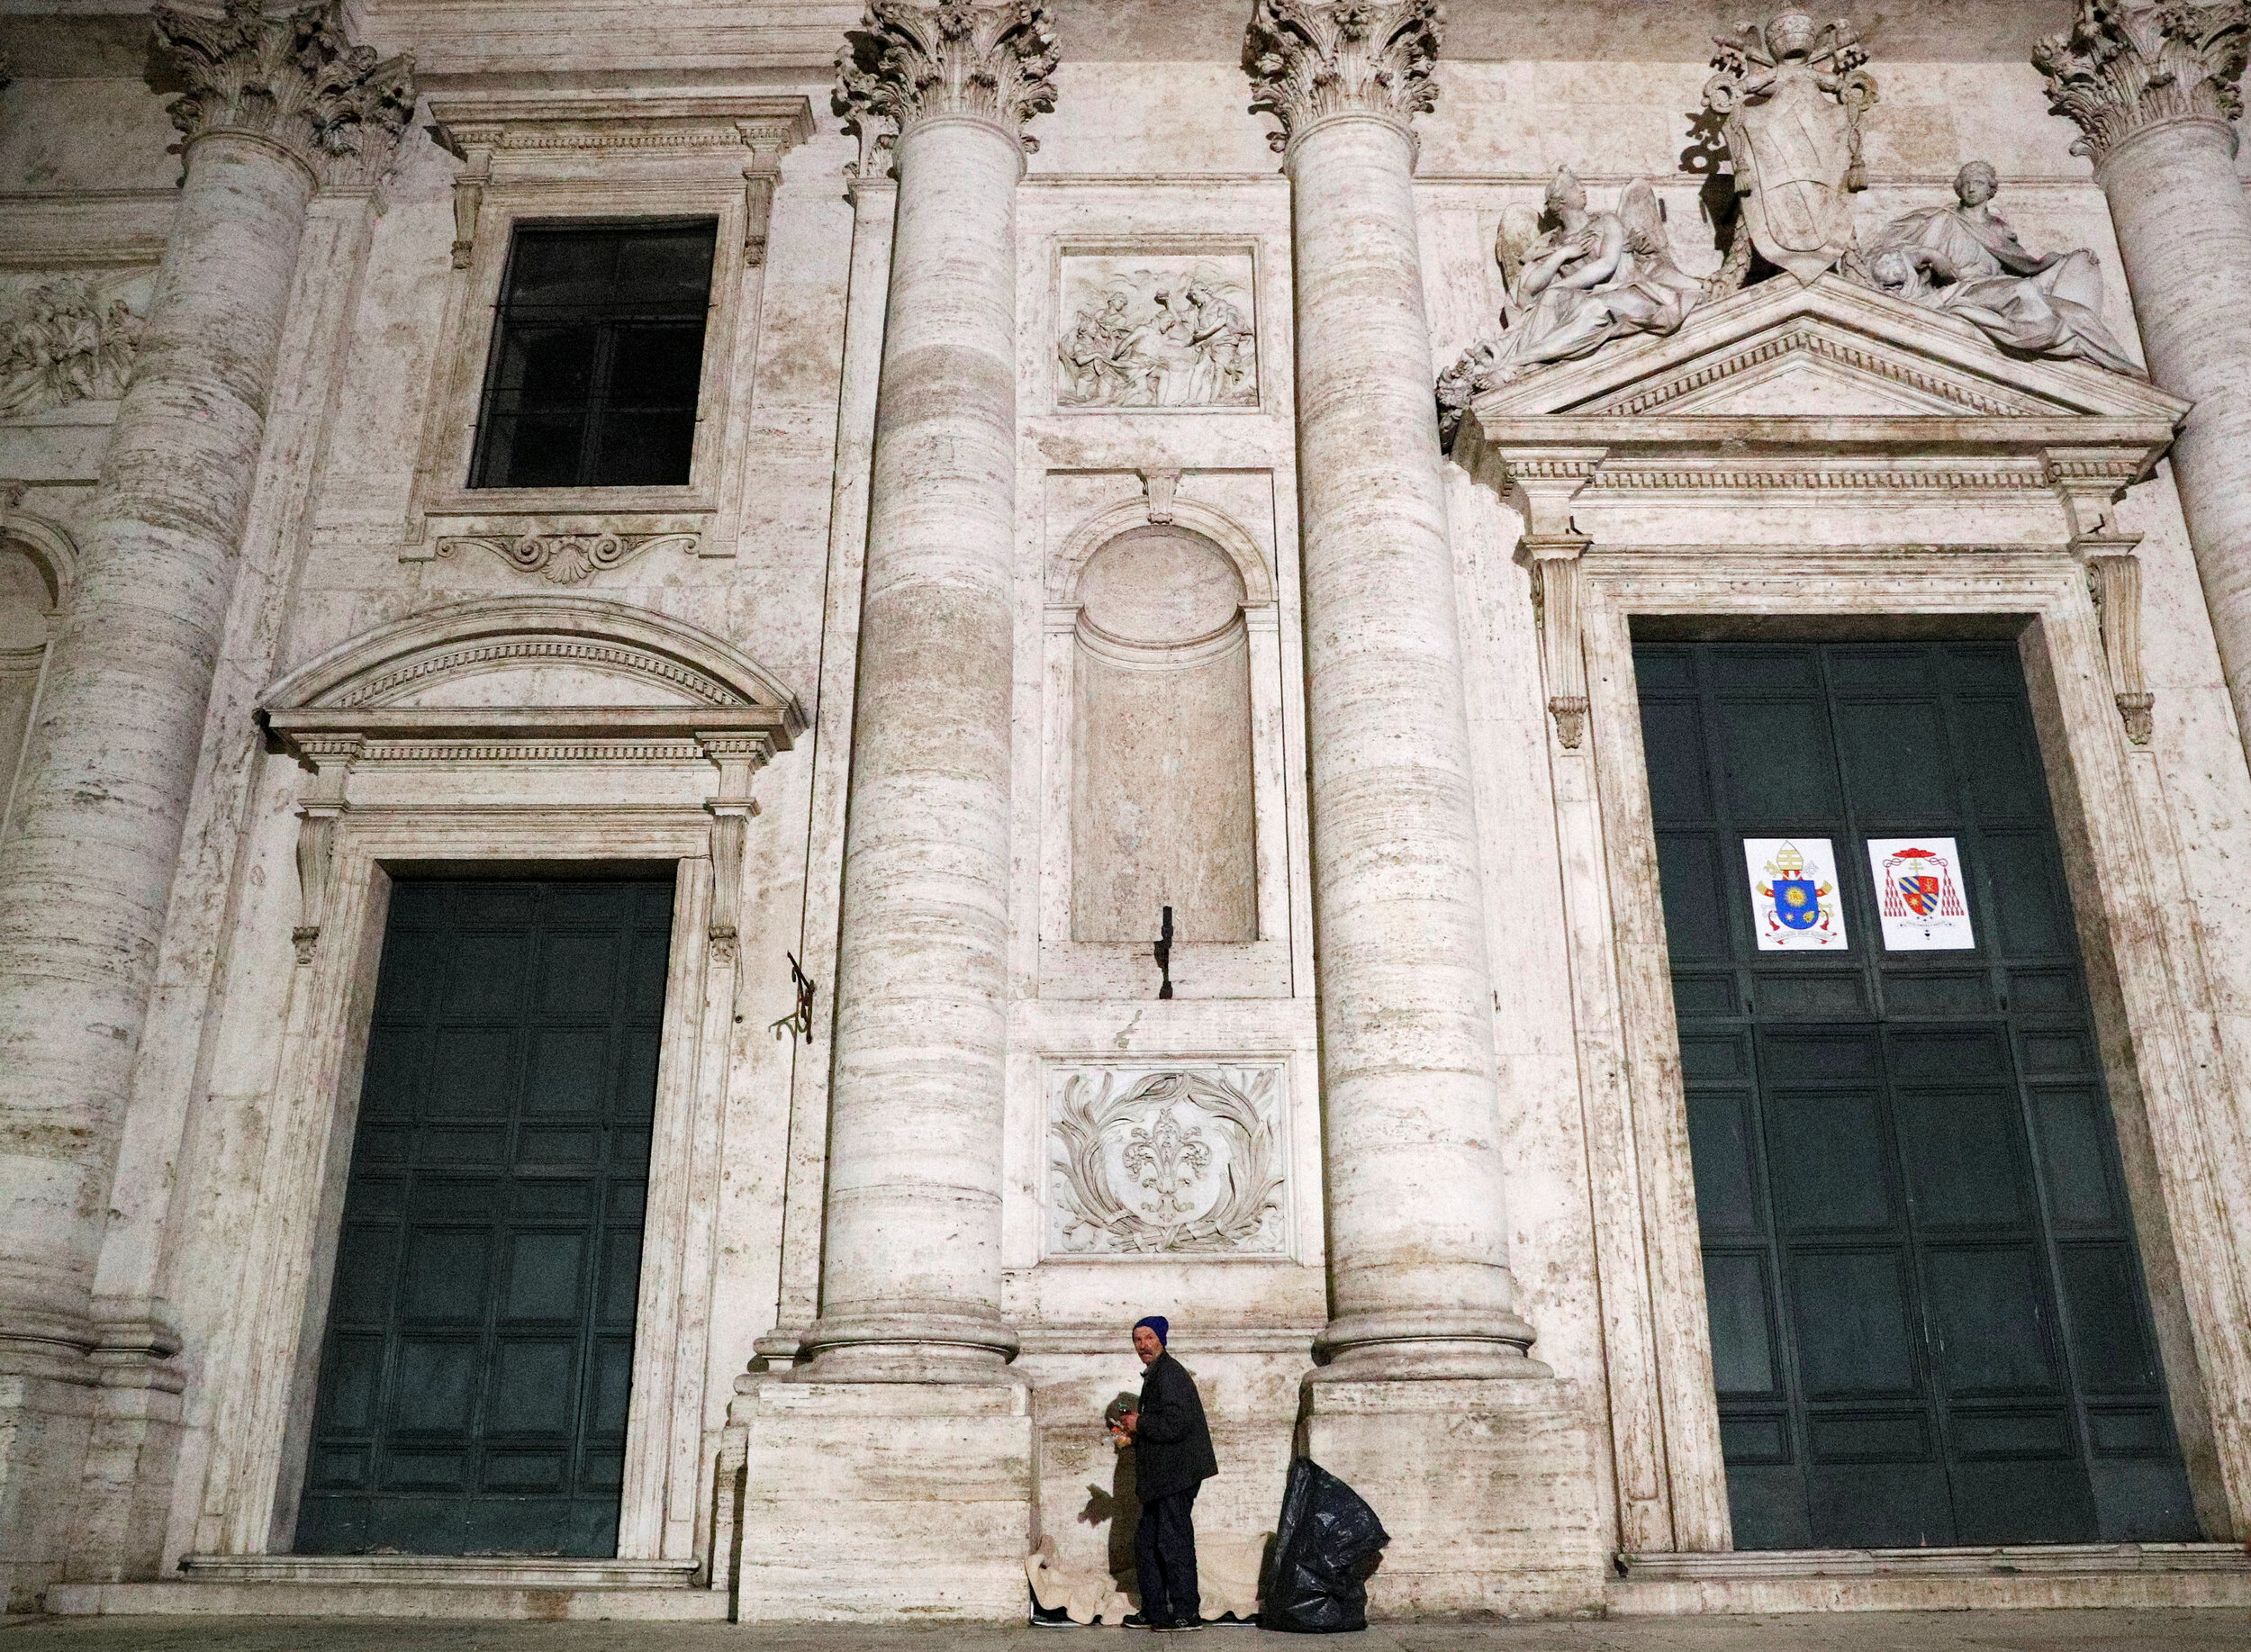  A homeless person stands outside a church in Rome, Italy, March 17, 2020. Since the coronavirus crisis, Red Cross workers have been increasing their daily activities to meet the growing needs of the homeless in Rome. 